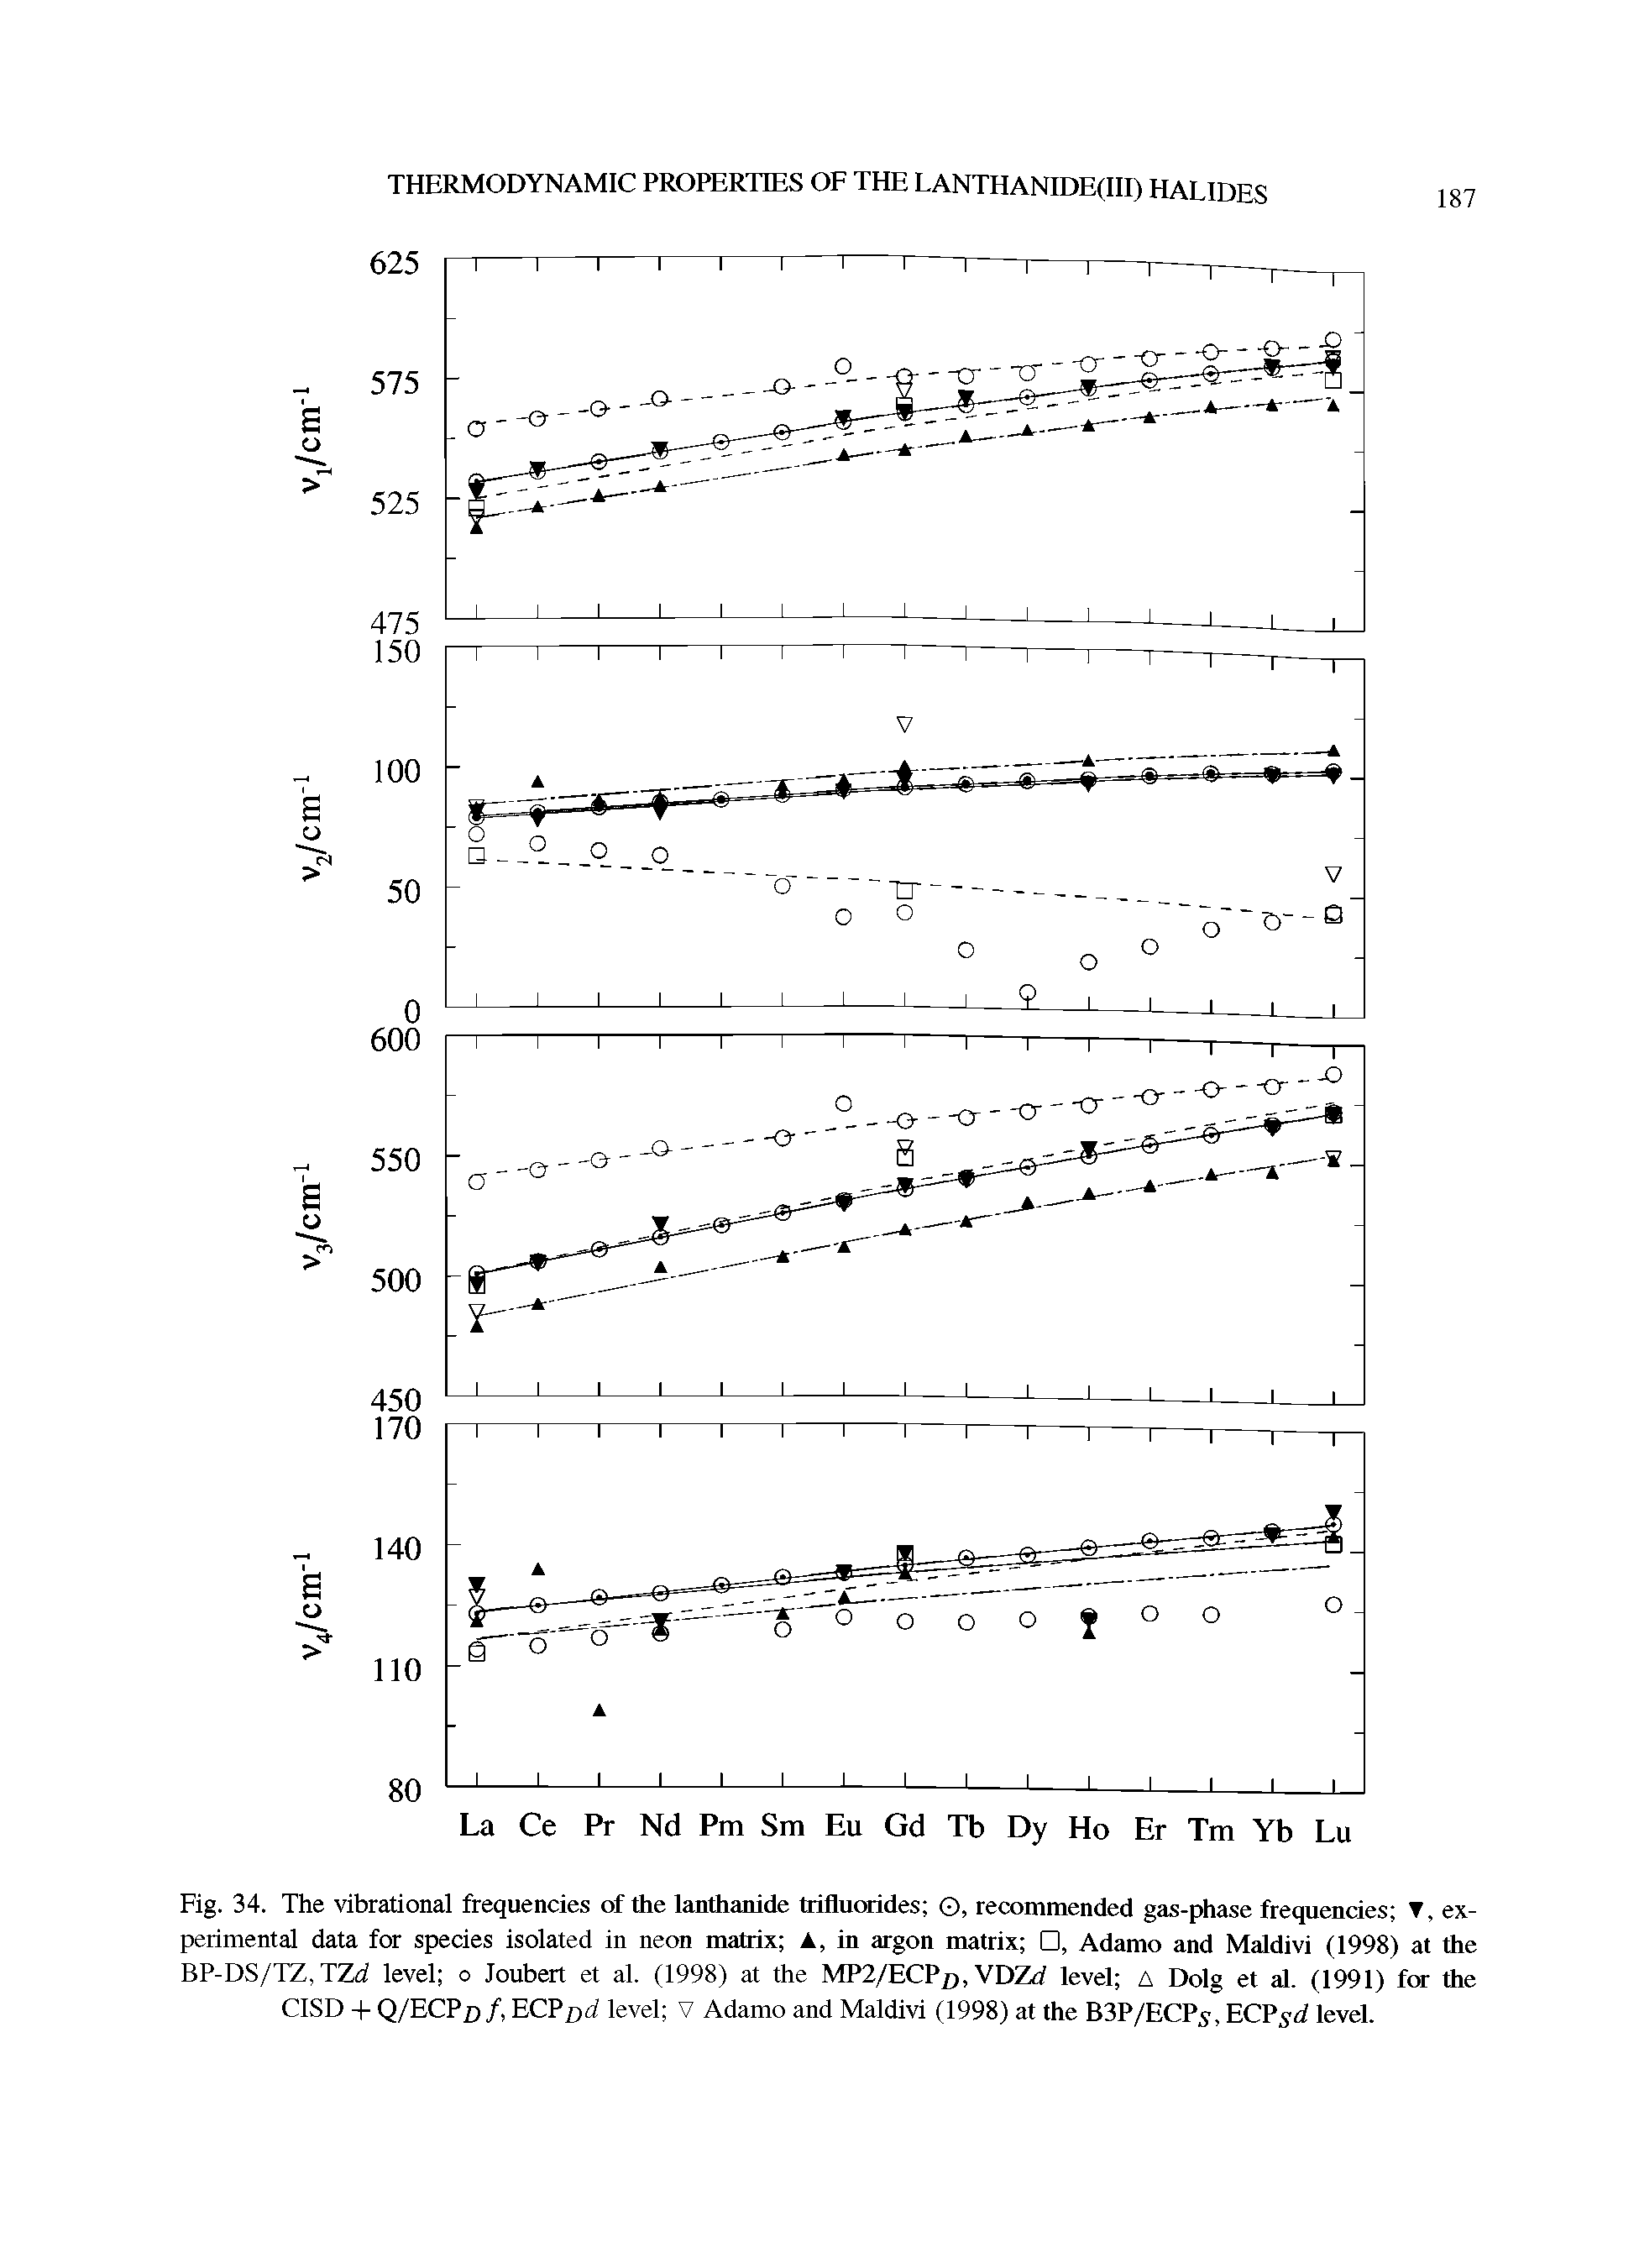 Fig. 34. The vibrational frequencies of the lanthanide trifluorides O, recommended gas-phase frequencies , experimental data for species isolated in neon matrix , in argon matrix , Adamo and Maldivi (1998) at the BP-DS/TZ, TZd level o Joubert et al. (1998) at the MP2/ECP ), VDZd level A Dolg et al. (1991) for the CISD + Q/ECP >/, ECPDd level V Adamo and Maldivi (1998) at the B3P/ECP5, ECP d level.